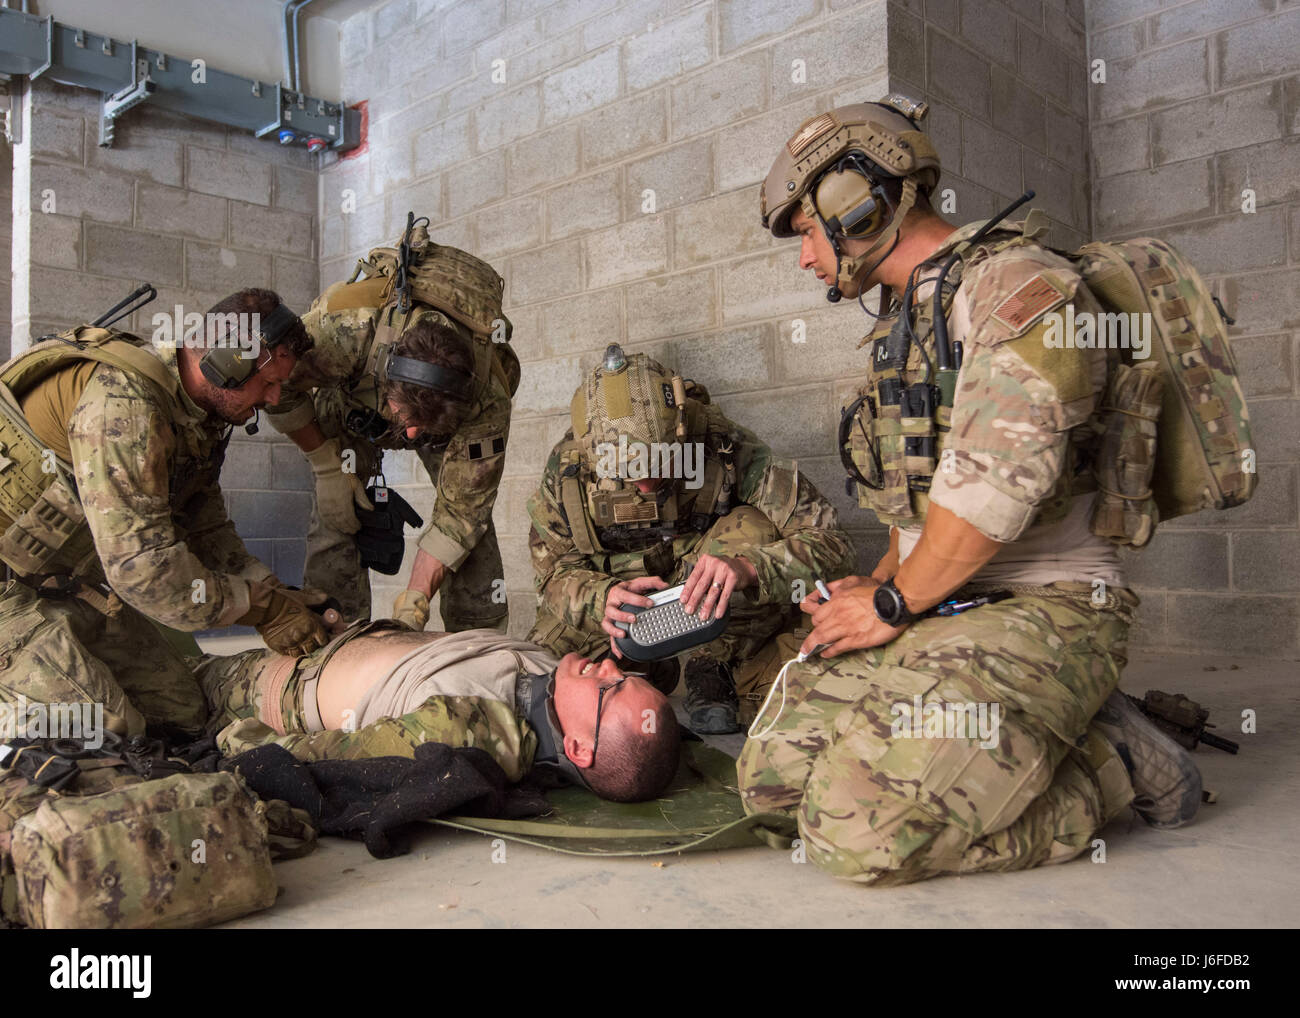 AMMAN, Jordan (May 11, 2017) Members of the Air Force and Italian Special Operations provide medical care during a combat search and rescue exercise in support of Eager Lion 2017. Eager Lion is an annual U.S. Central Command exercise in Jordan designed to strengthen military-to-military relationships between the U.S., Jordan and other international partners. This year's iteration is comprised of about 7,200 military personnel from more than 20 nations that will respond to scenarios involving border security, command and control, cyber defense and battlespace management. (U.S. Navy photo by Mas Stock Photo